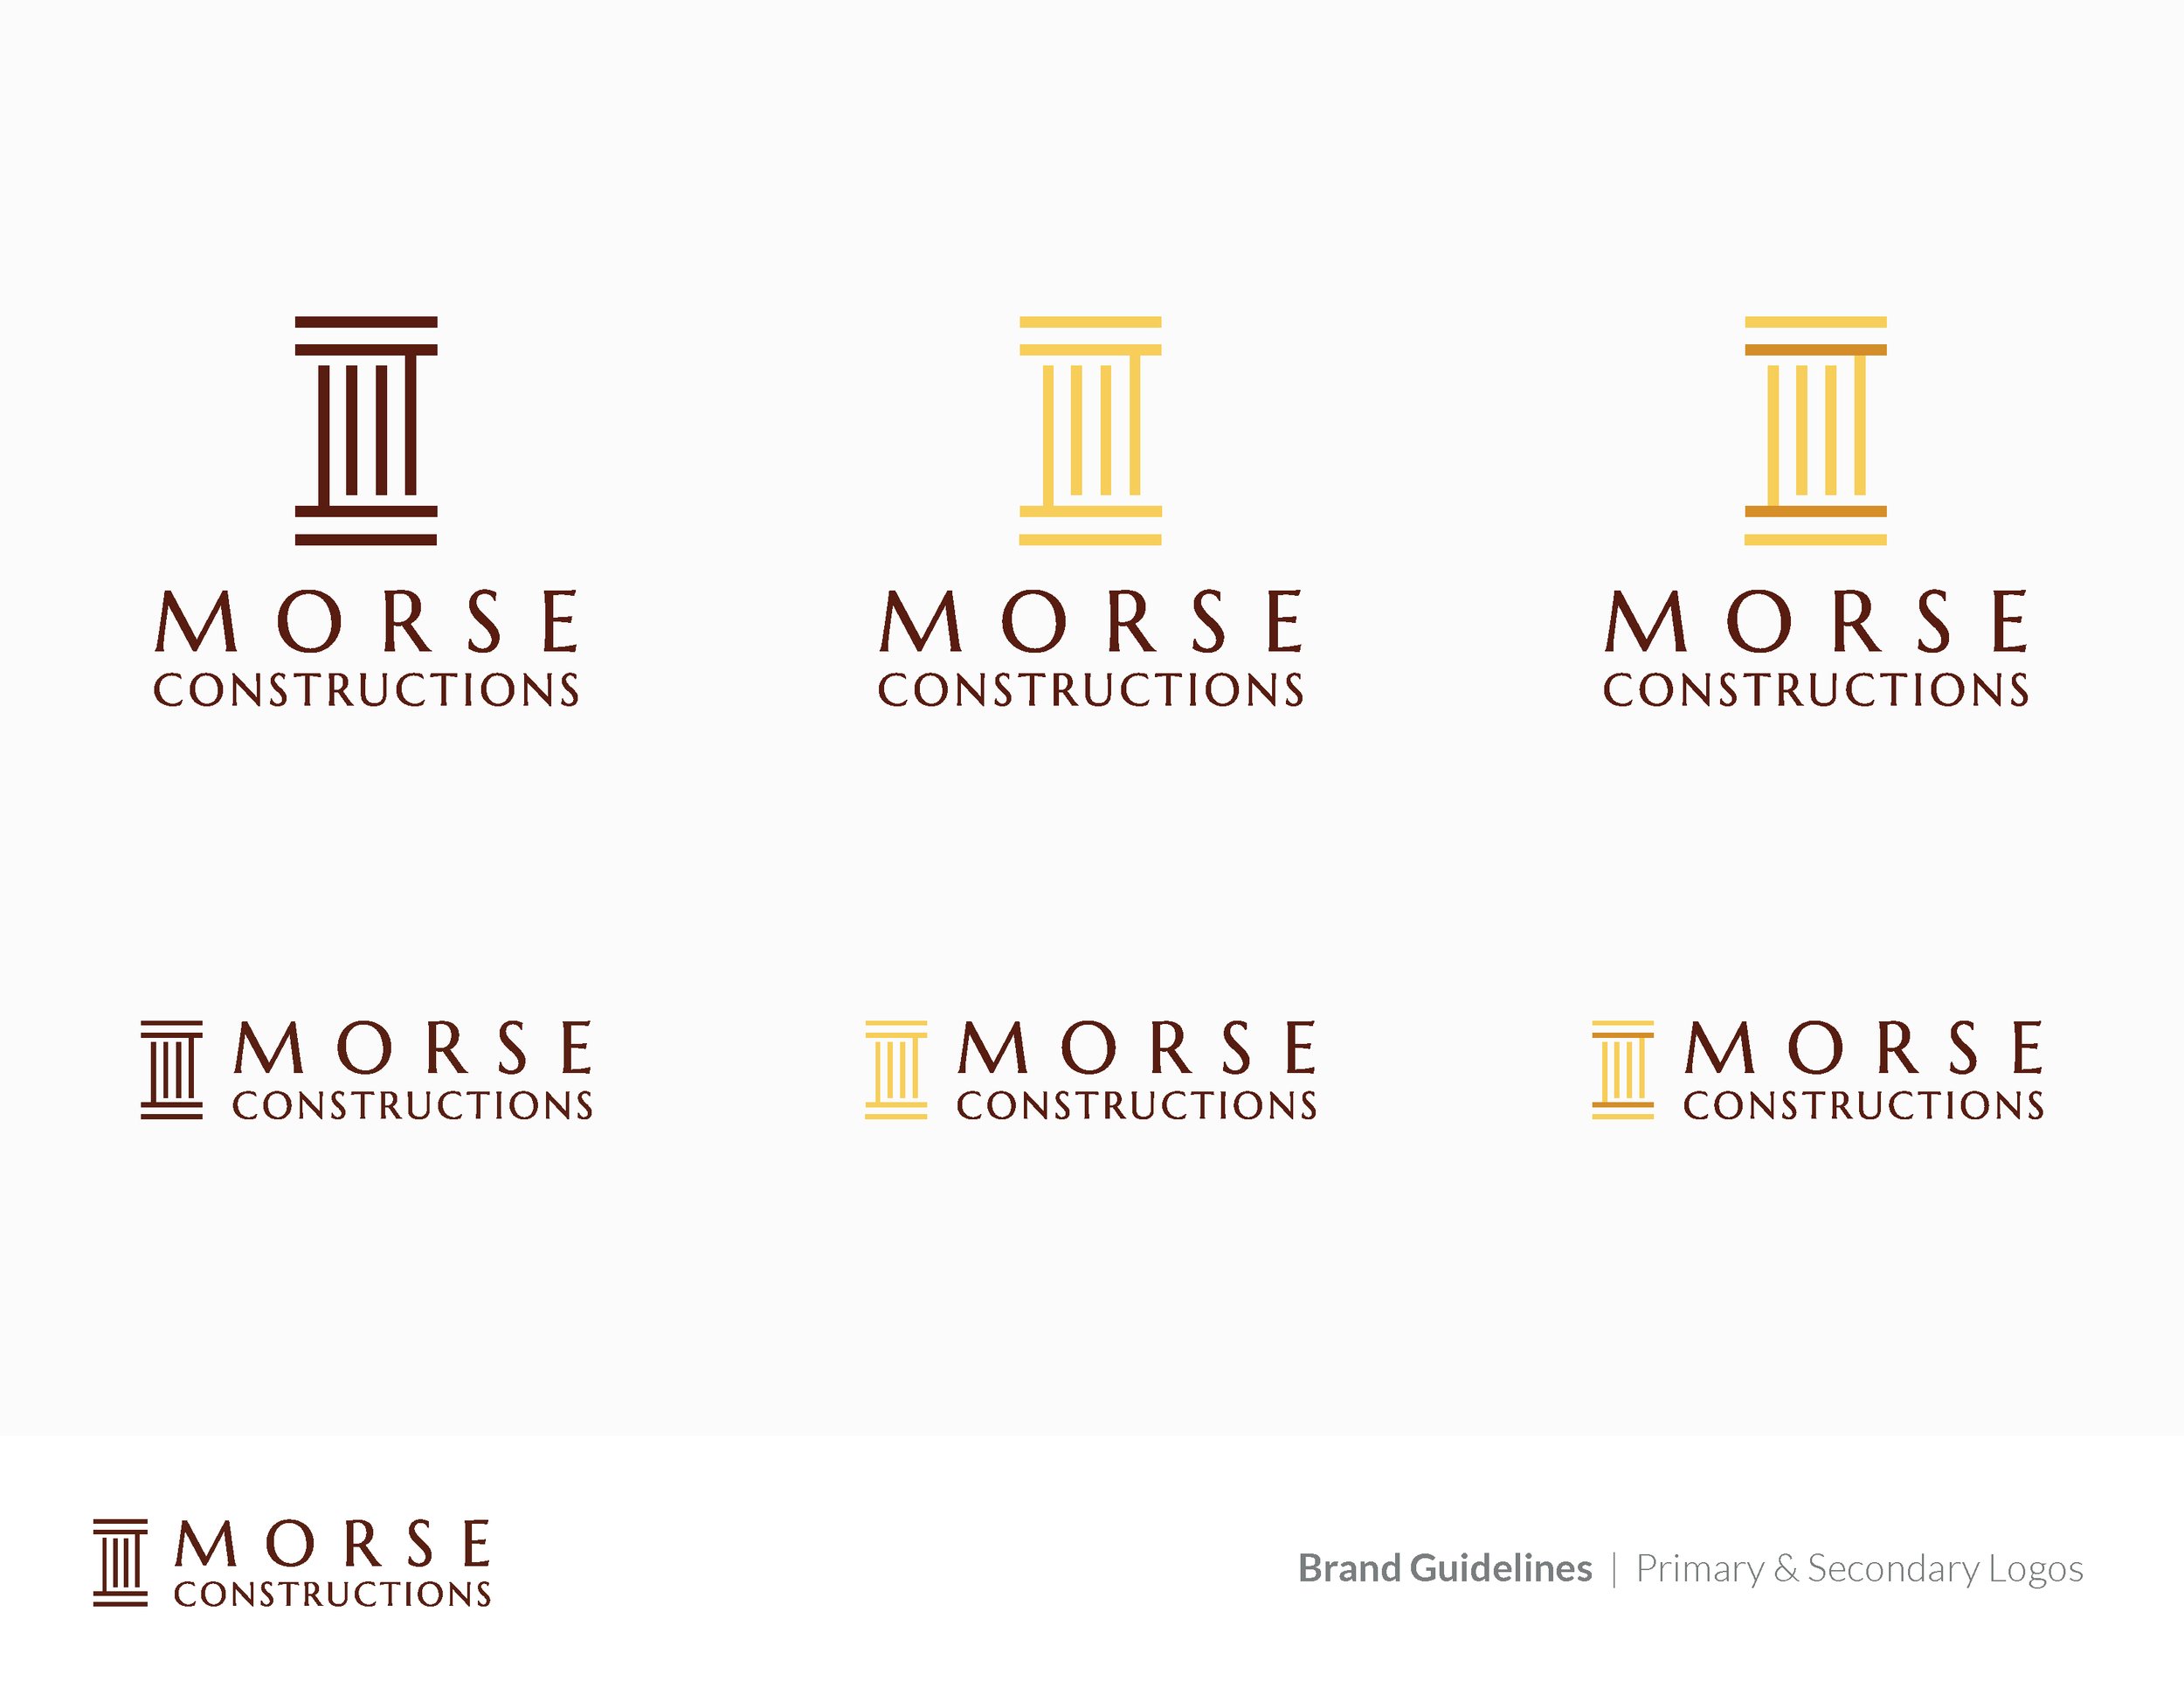 Morse Constructions Brand Guidelines 3.jpg